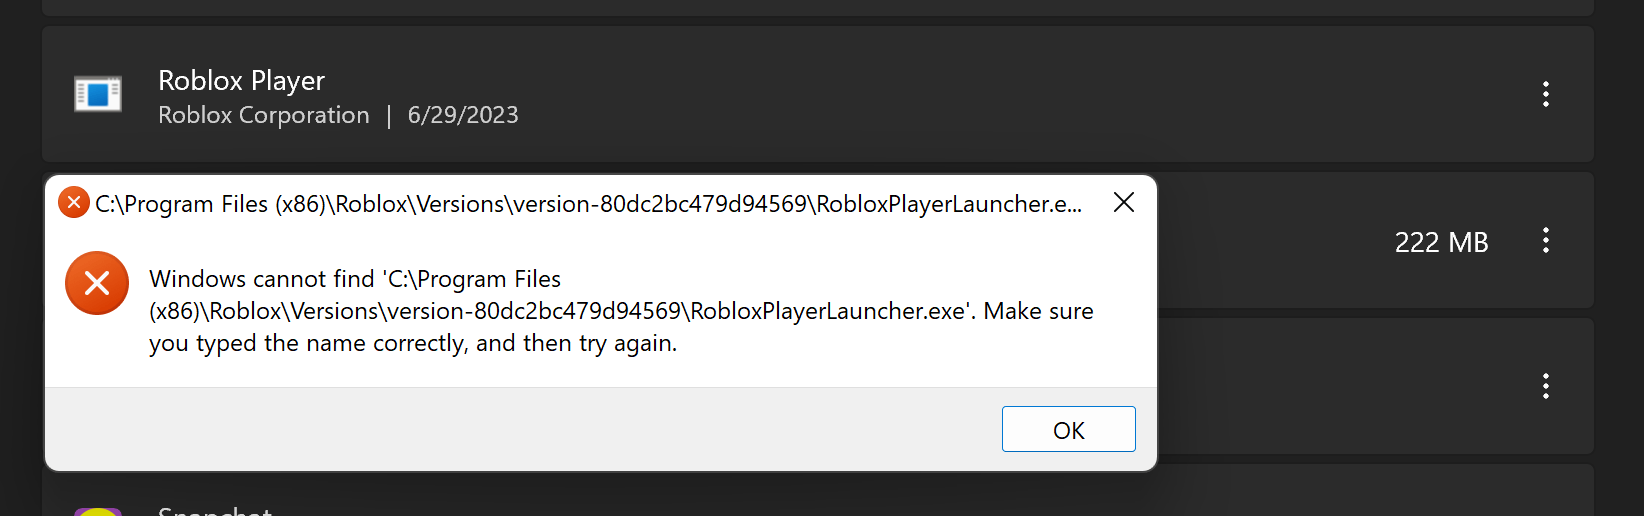 Download Free RobloxPlayer.exe to Play Roblox [LATEST]